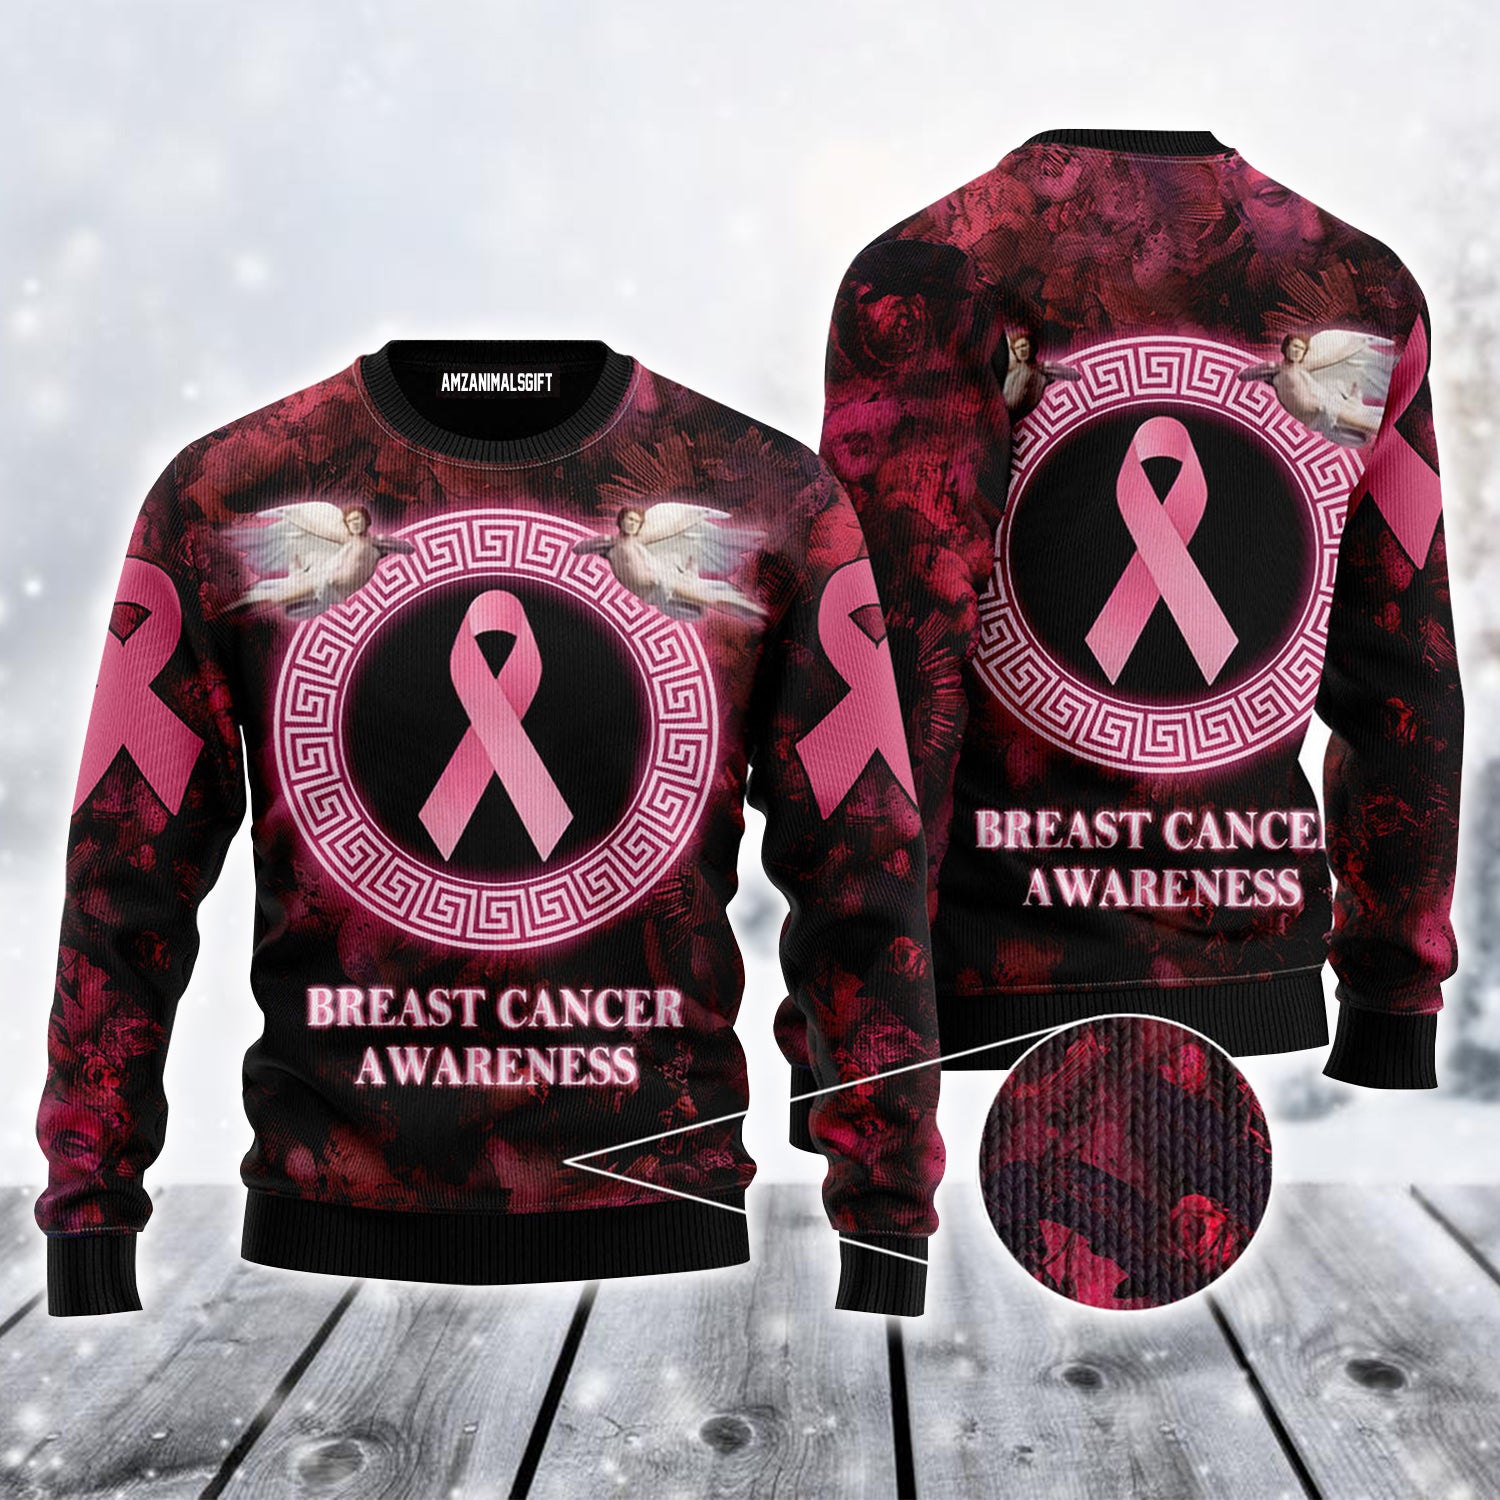 Breast Cancer Awareness Ugly Sweater, Funny Christmas Ugly Sweater, Angel Ugly Sweater For Men & Women - Perfect Gift For Christmas, Family, Friends